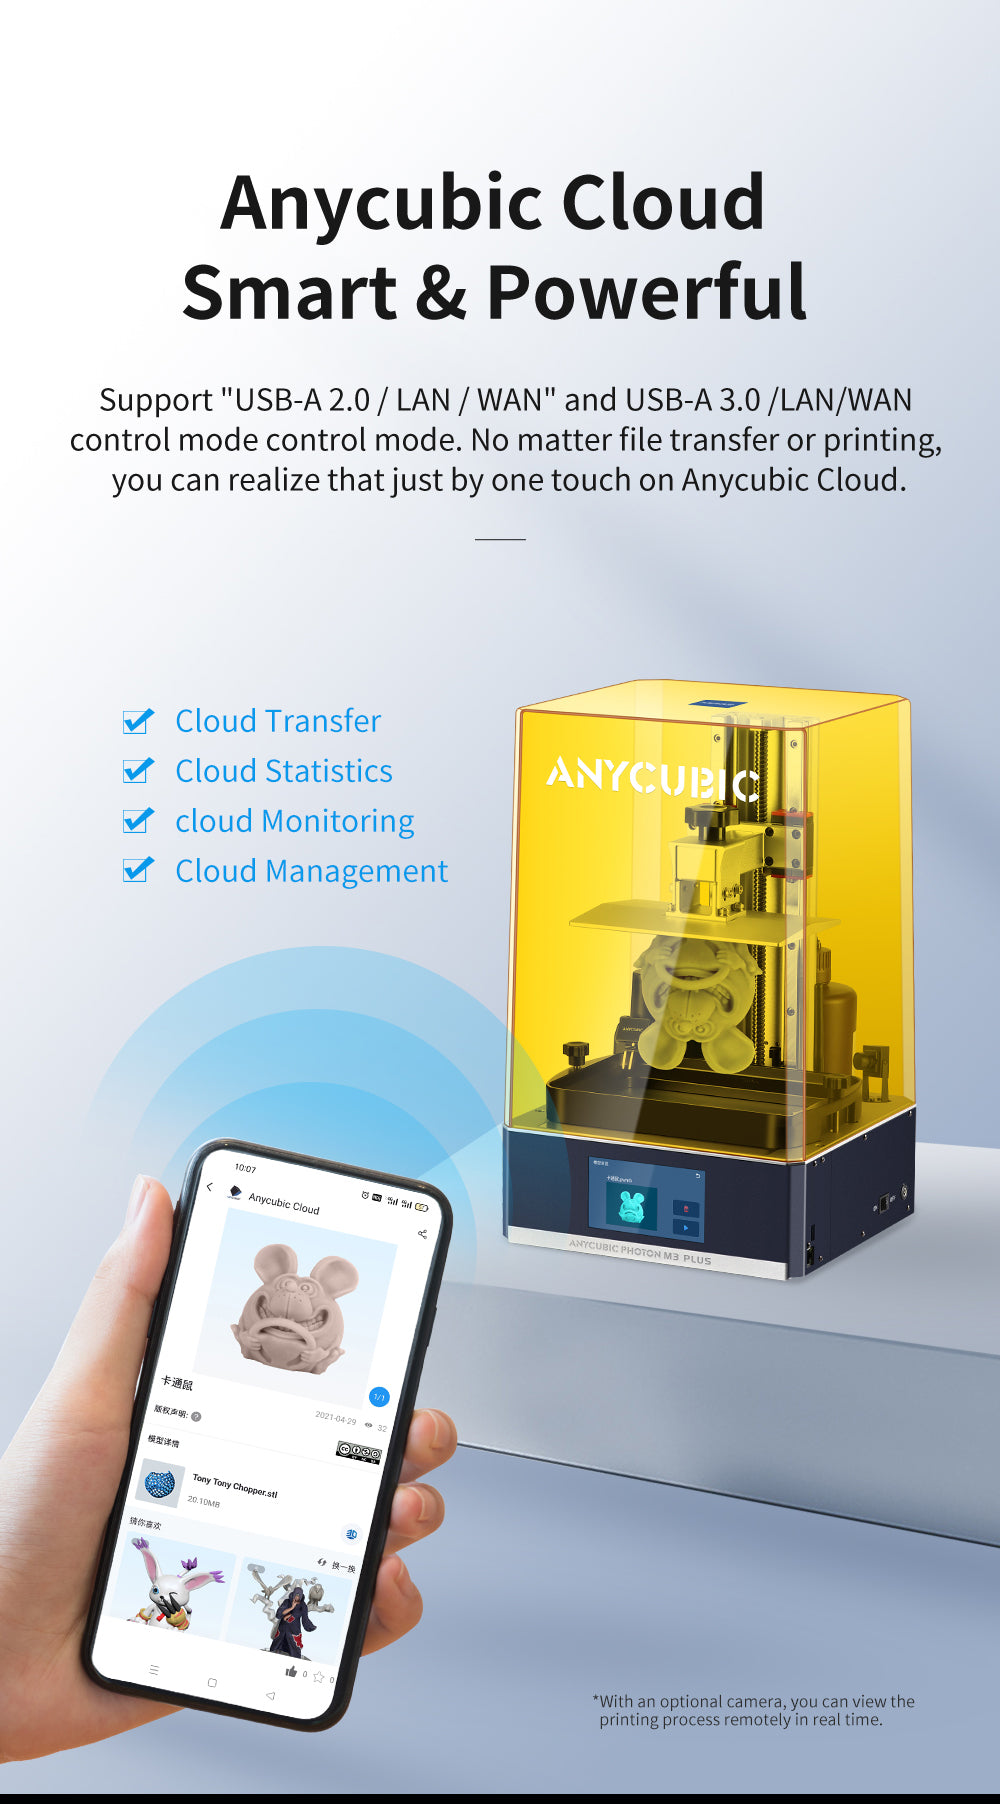 Anycubic Photon M3 Plus 3D Printer - Smart & Connected17